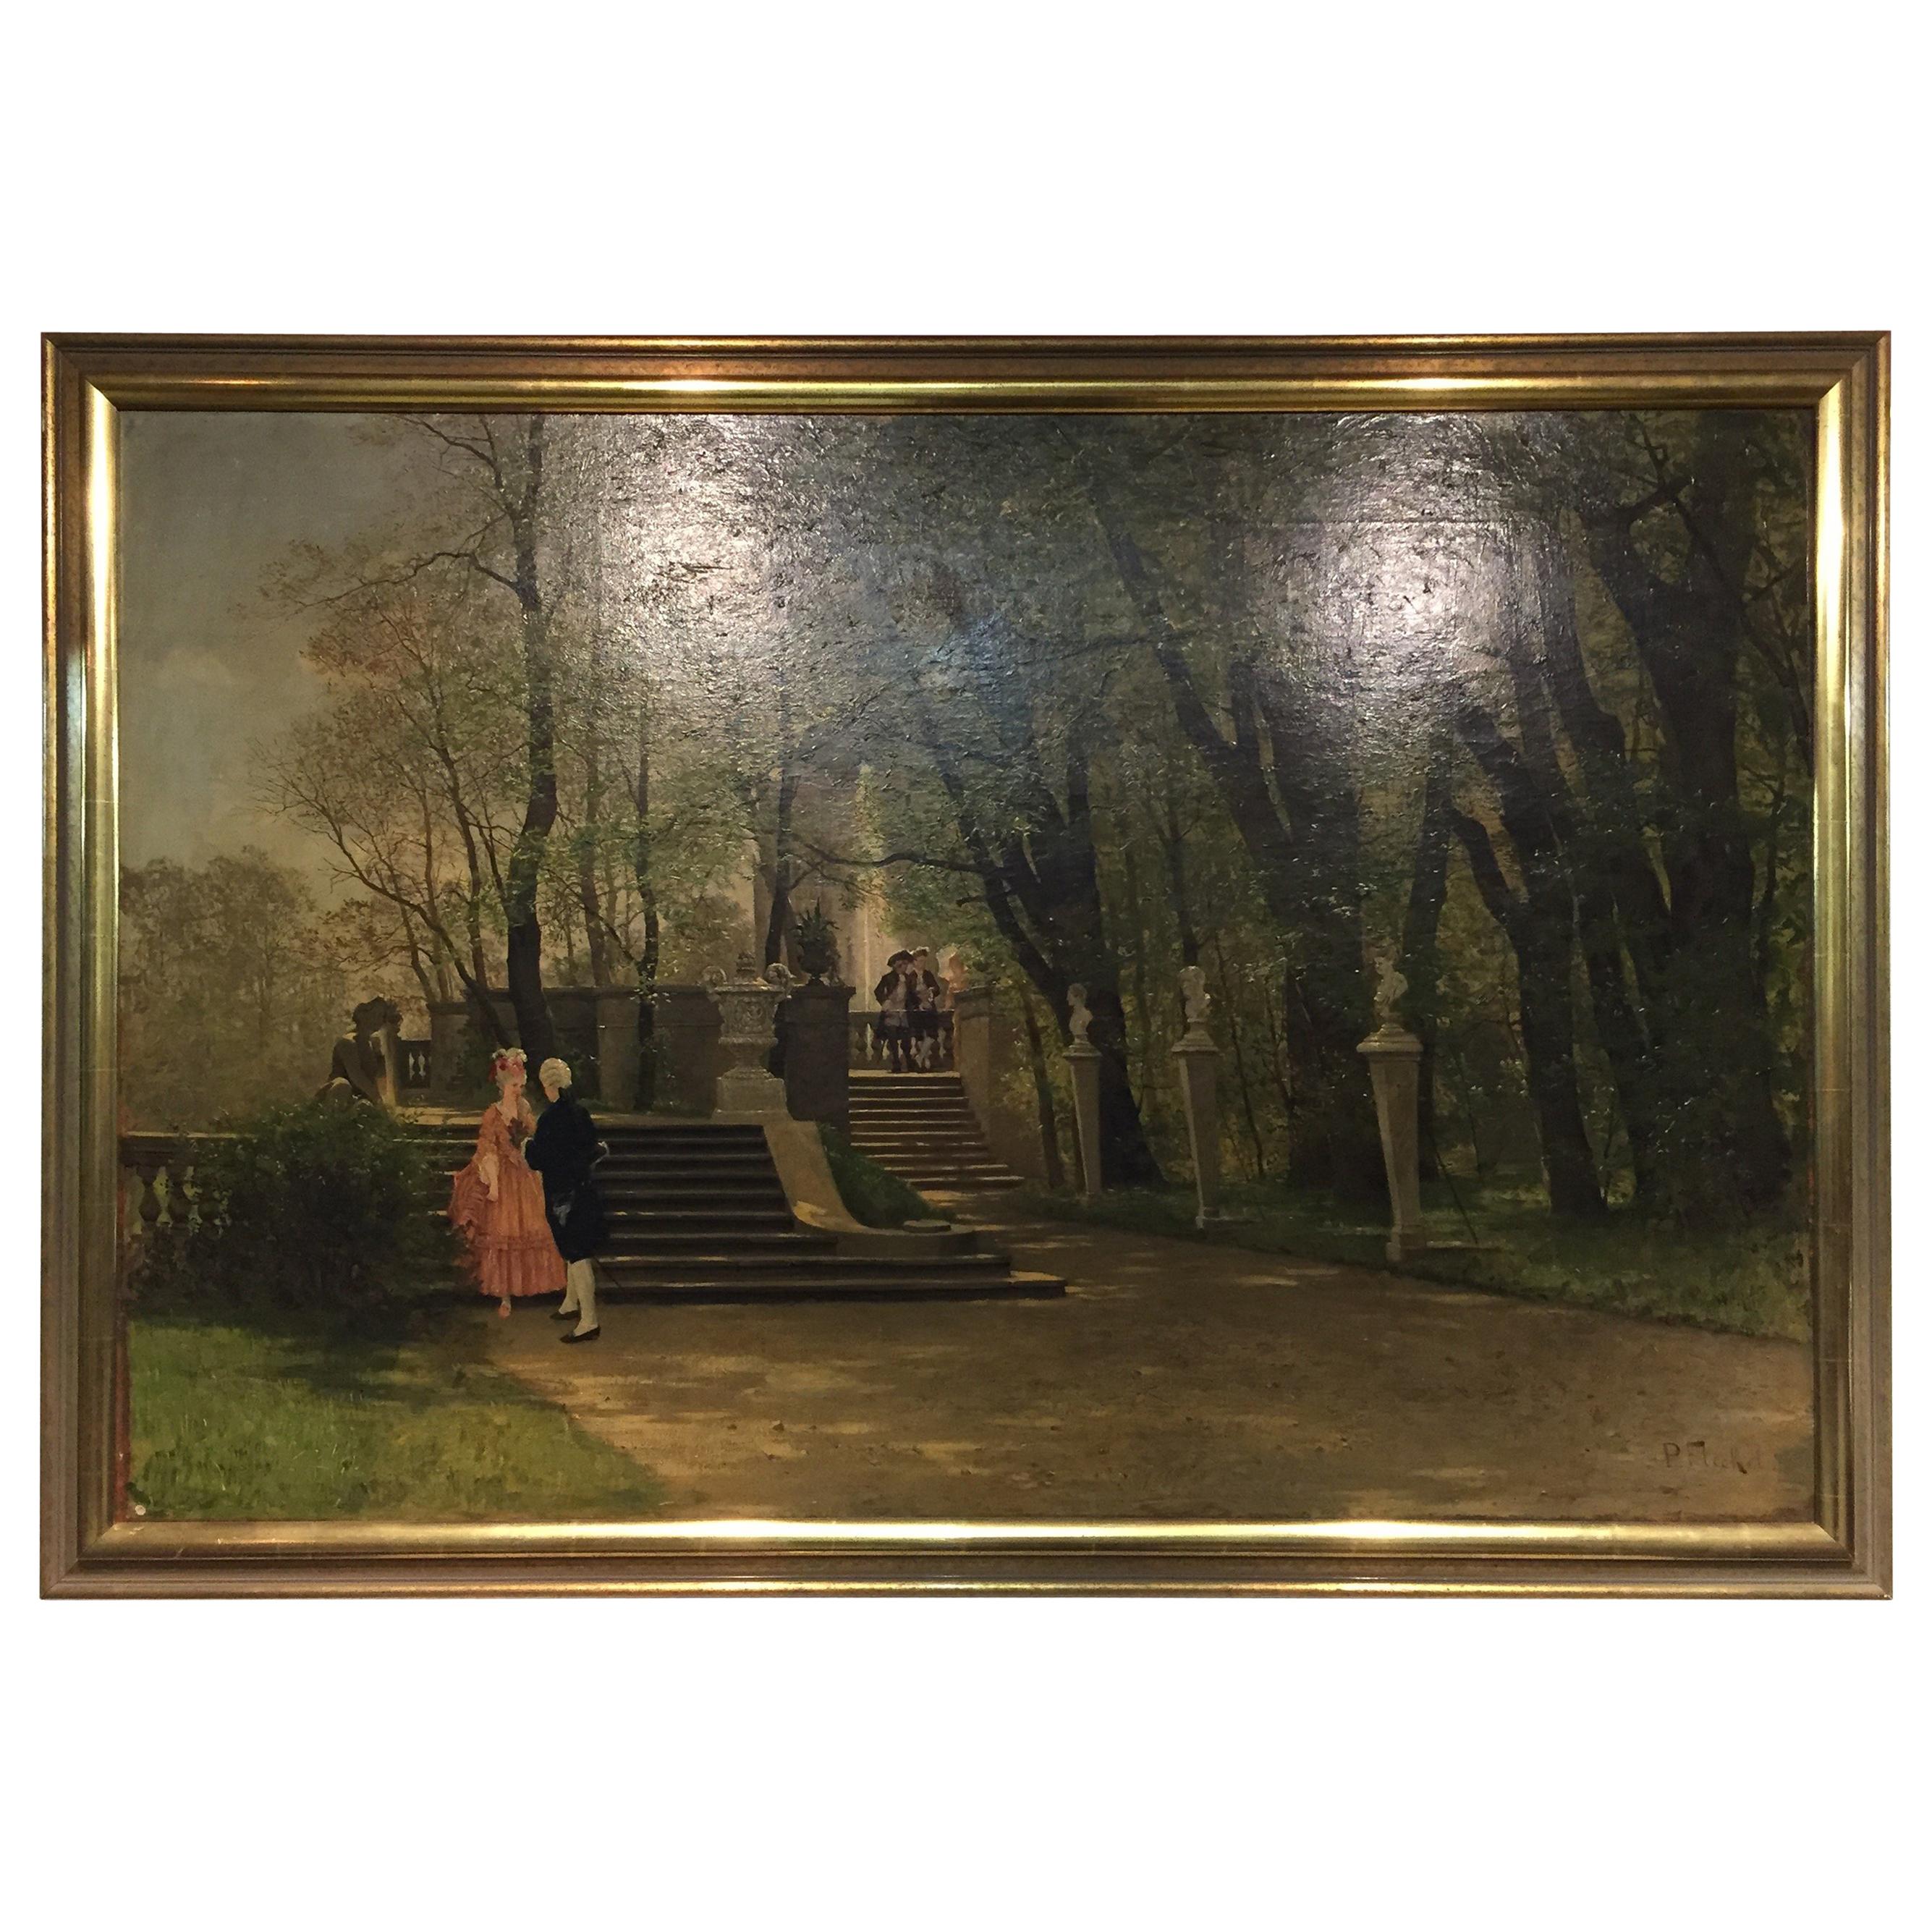 Oil Painting by P. F. Flickel in the Castle Garden